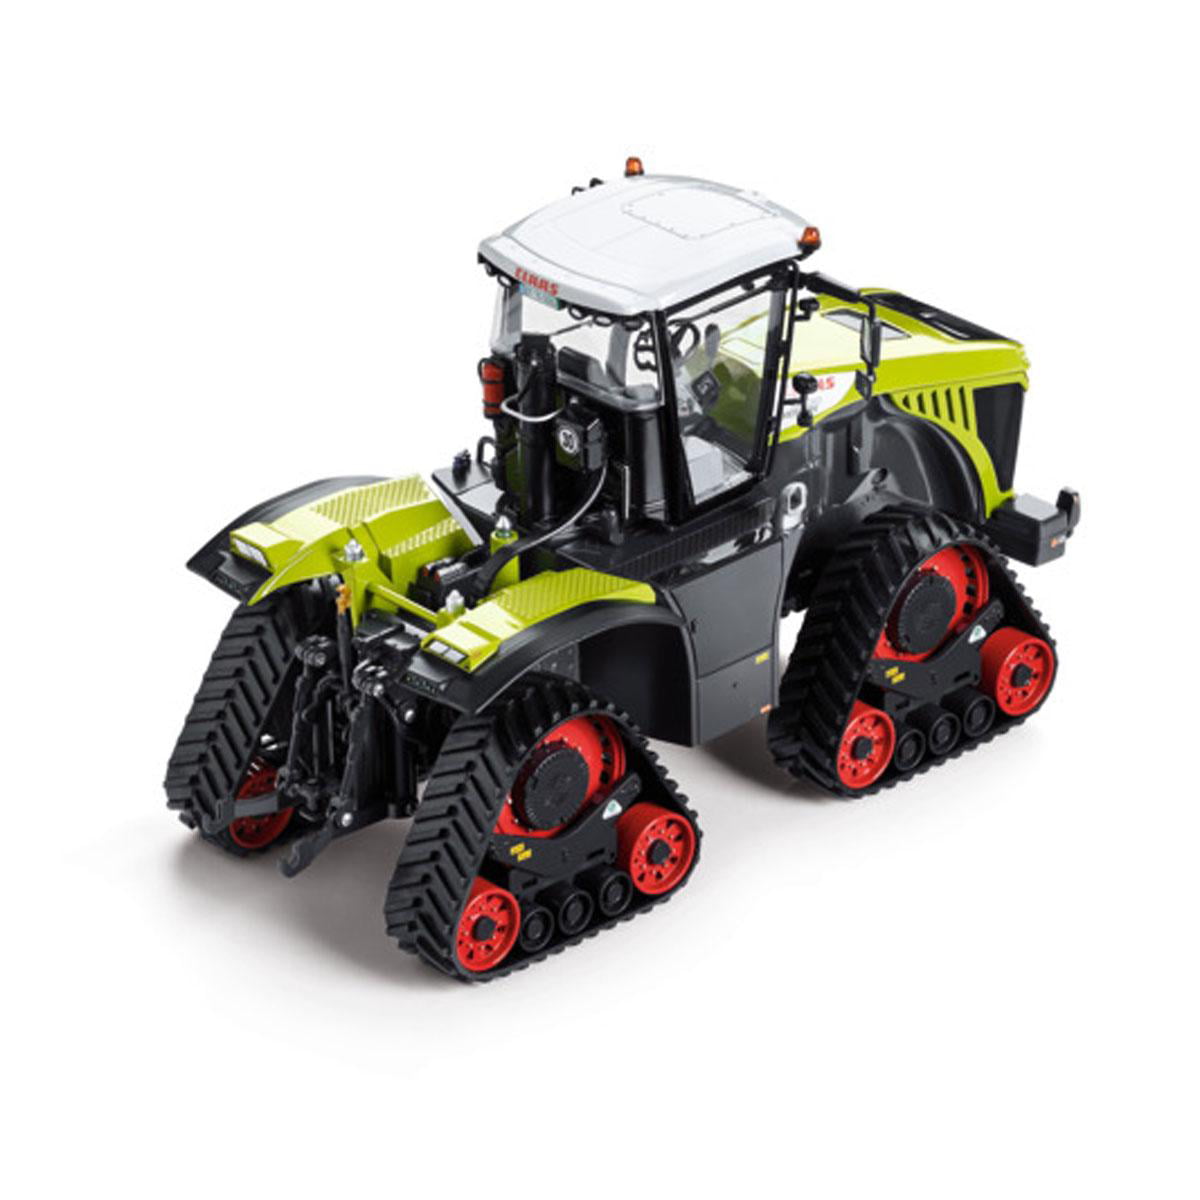 Wiking Claas Xerion 5000 Trac TS Tractor with Tracks 1:32 Scale Model 02558500 